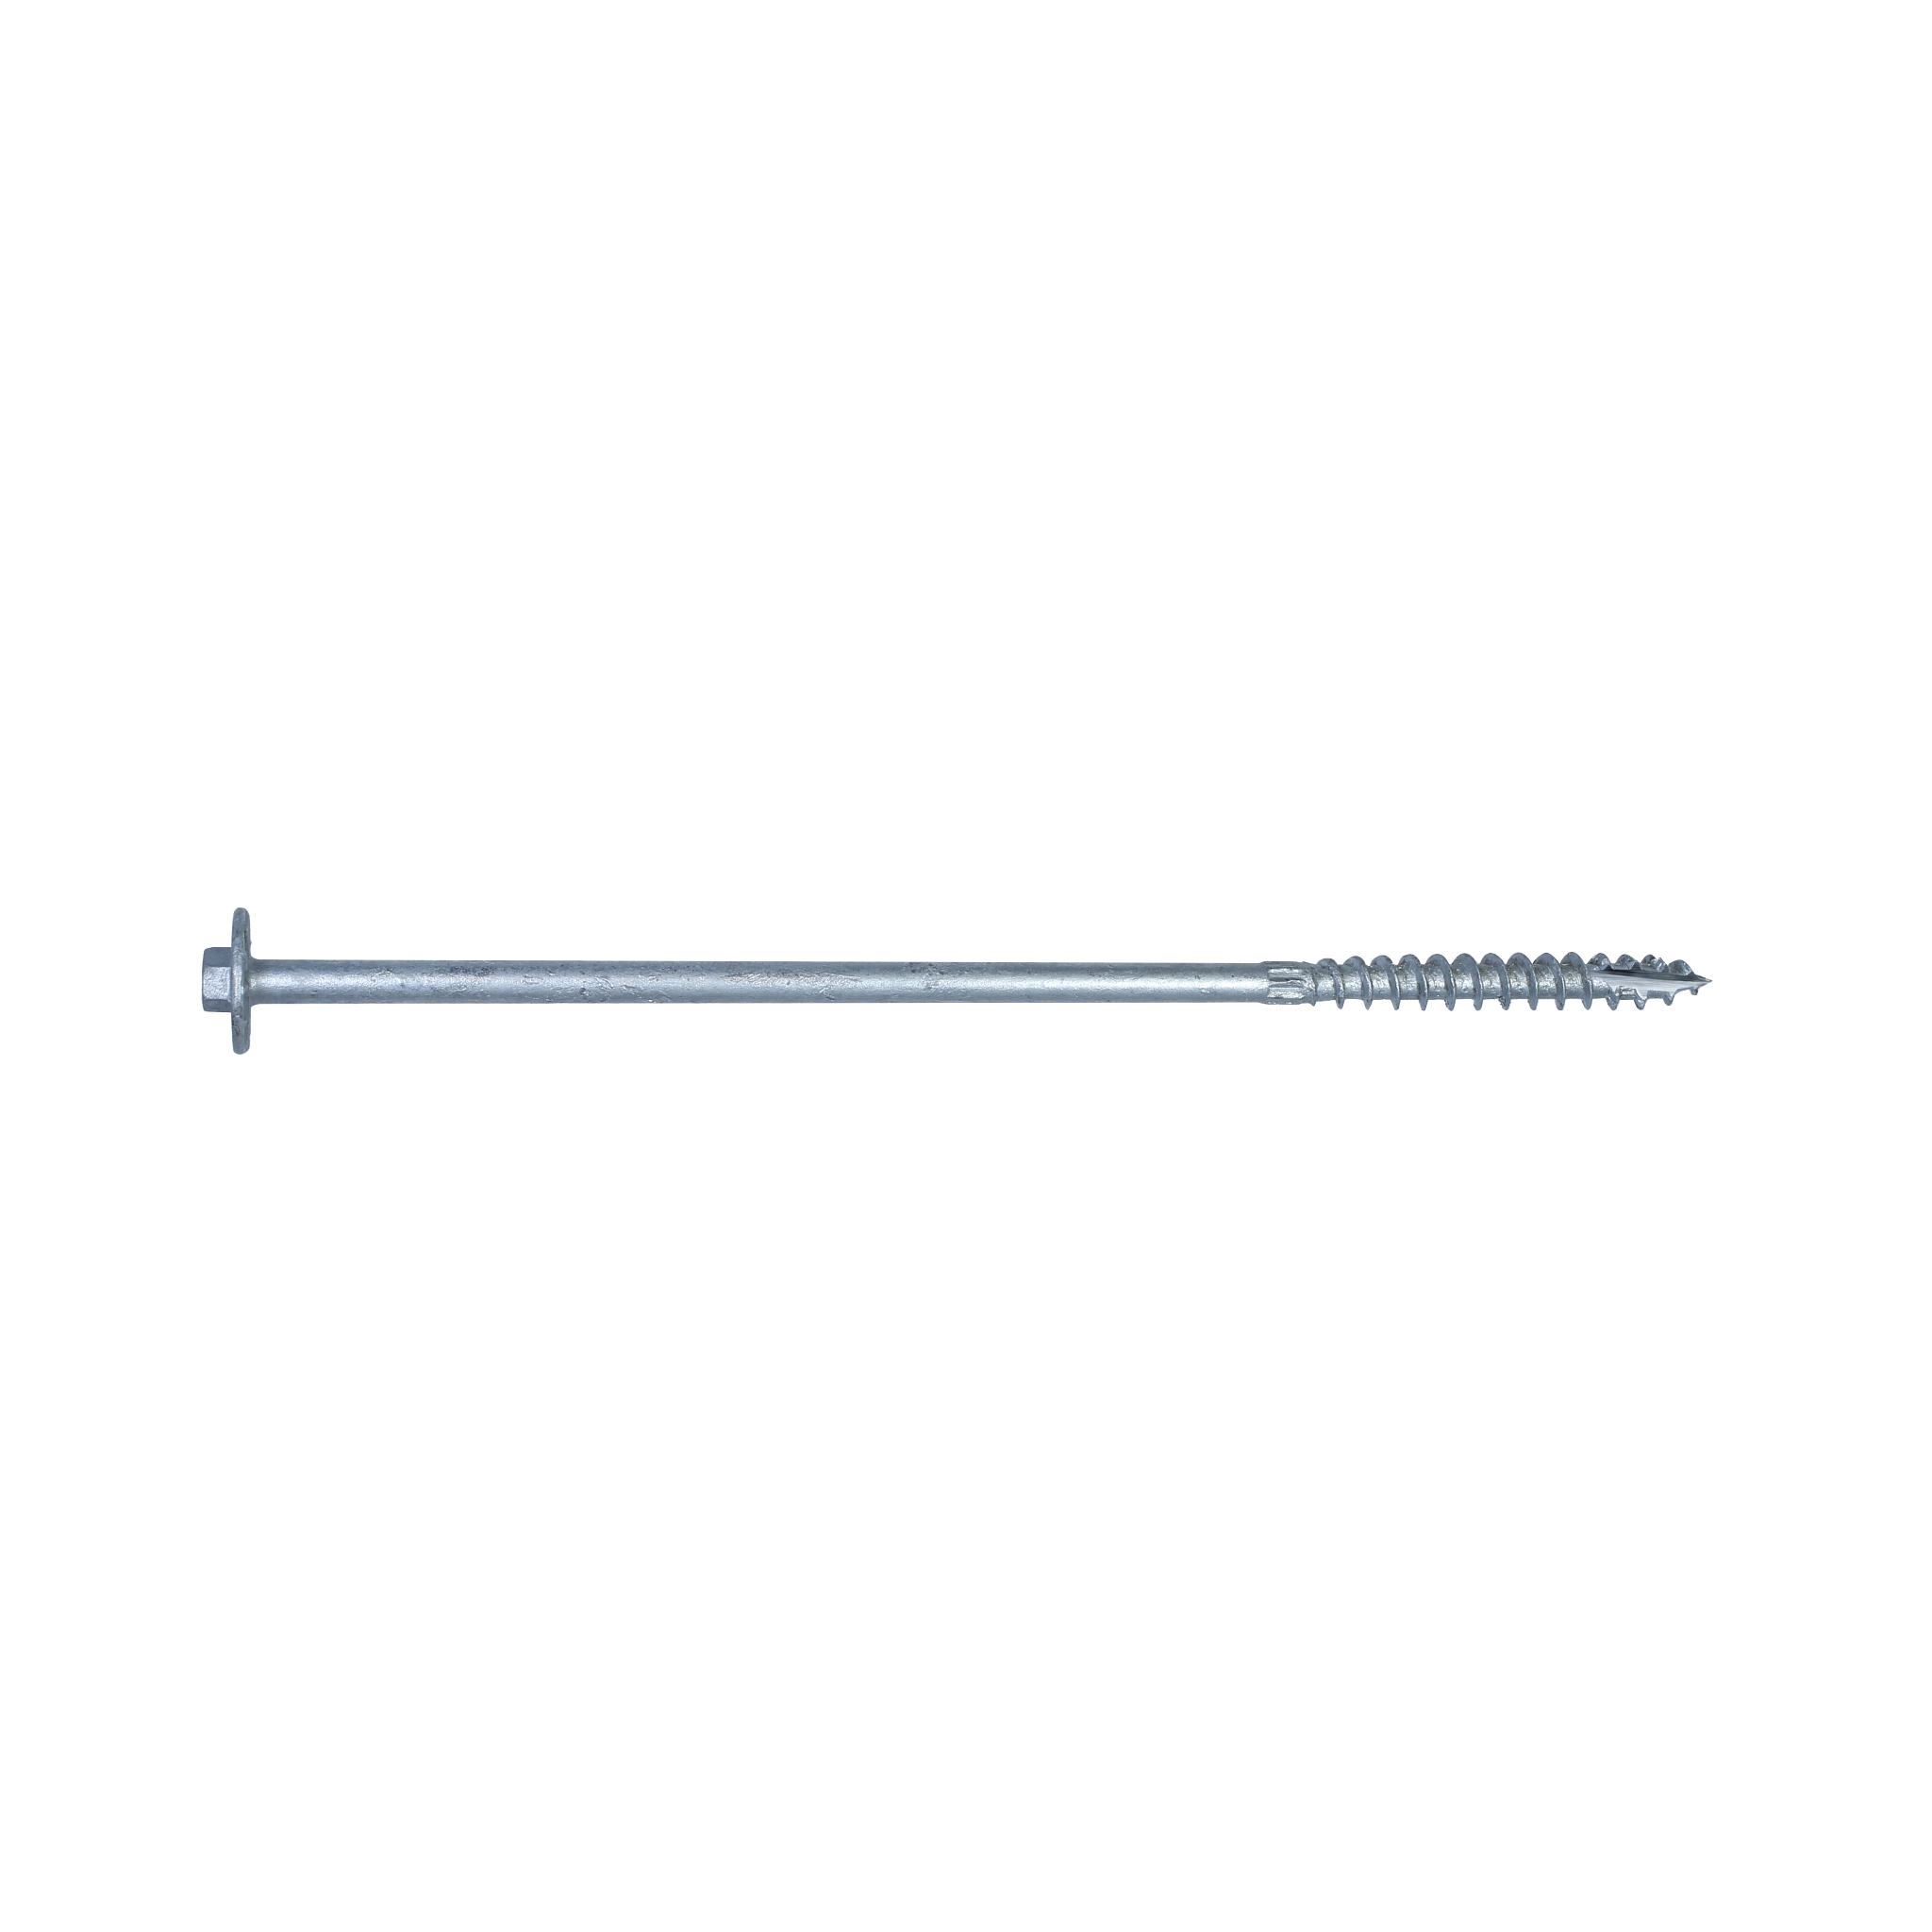 .276"x10" Strong-Drive® SDWH 3/8" Timber Hex Screw, Hot Dipped Galvanized